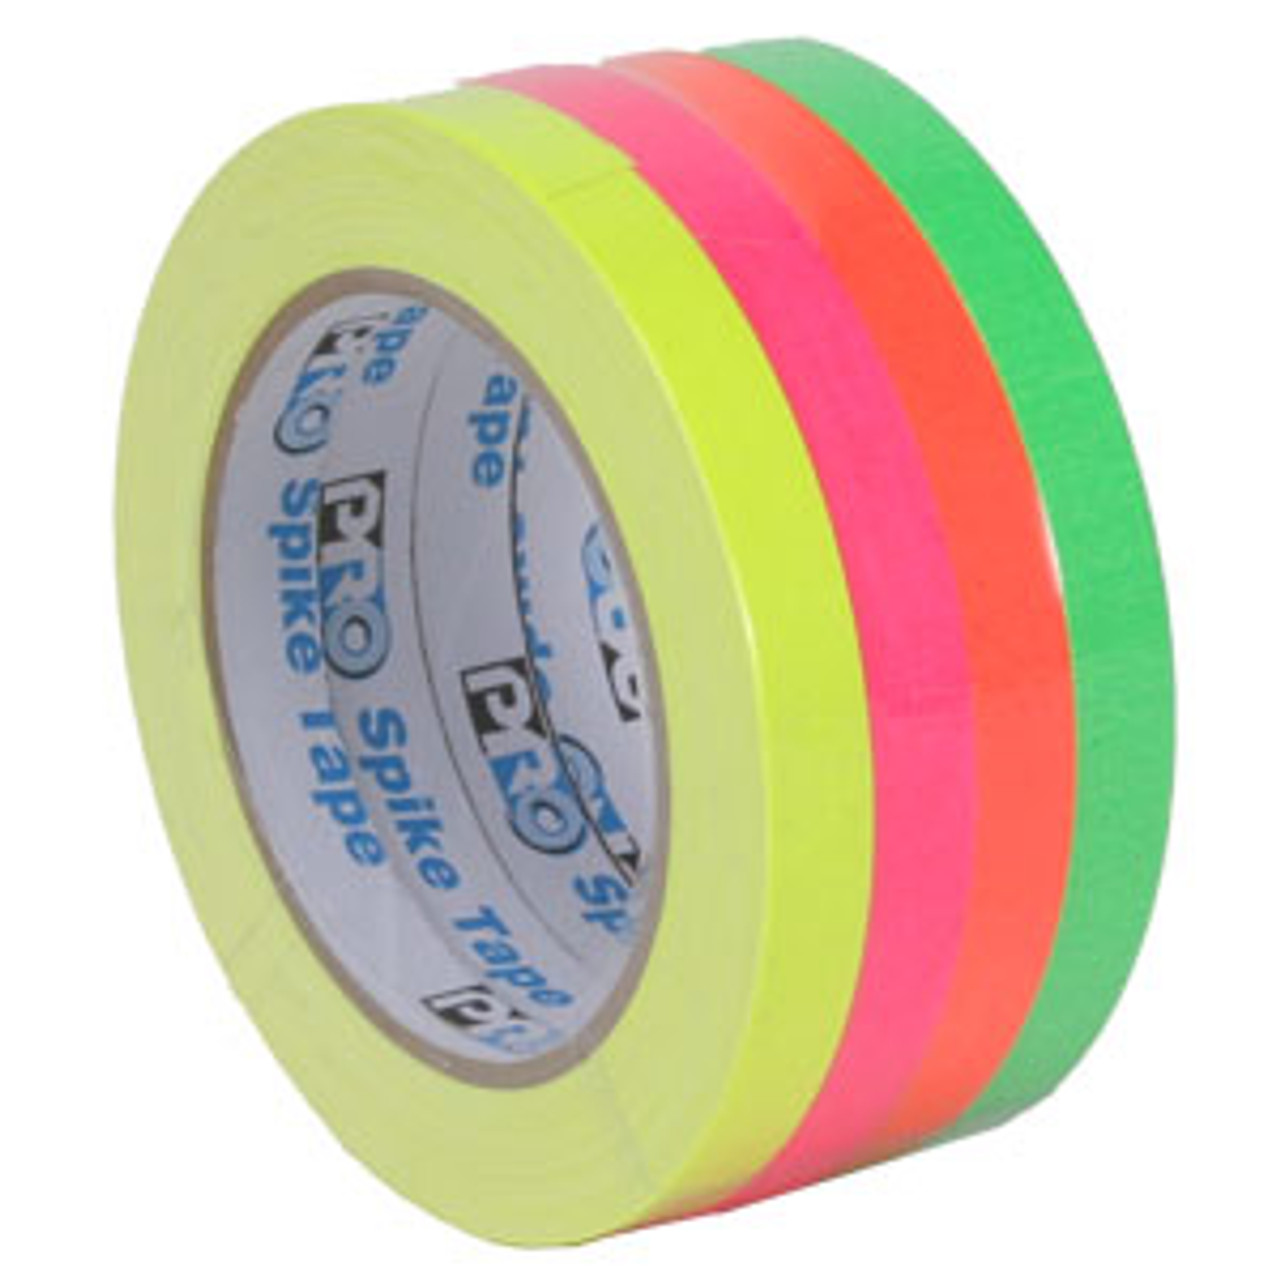 Pro Tapes Pro Spike Stack 1/2-inch Gaffers Tape - Fluorescent